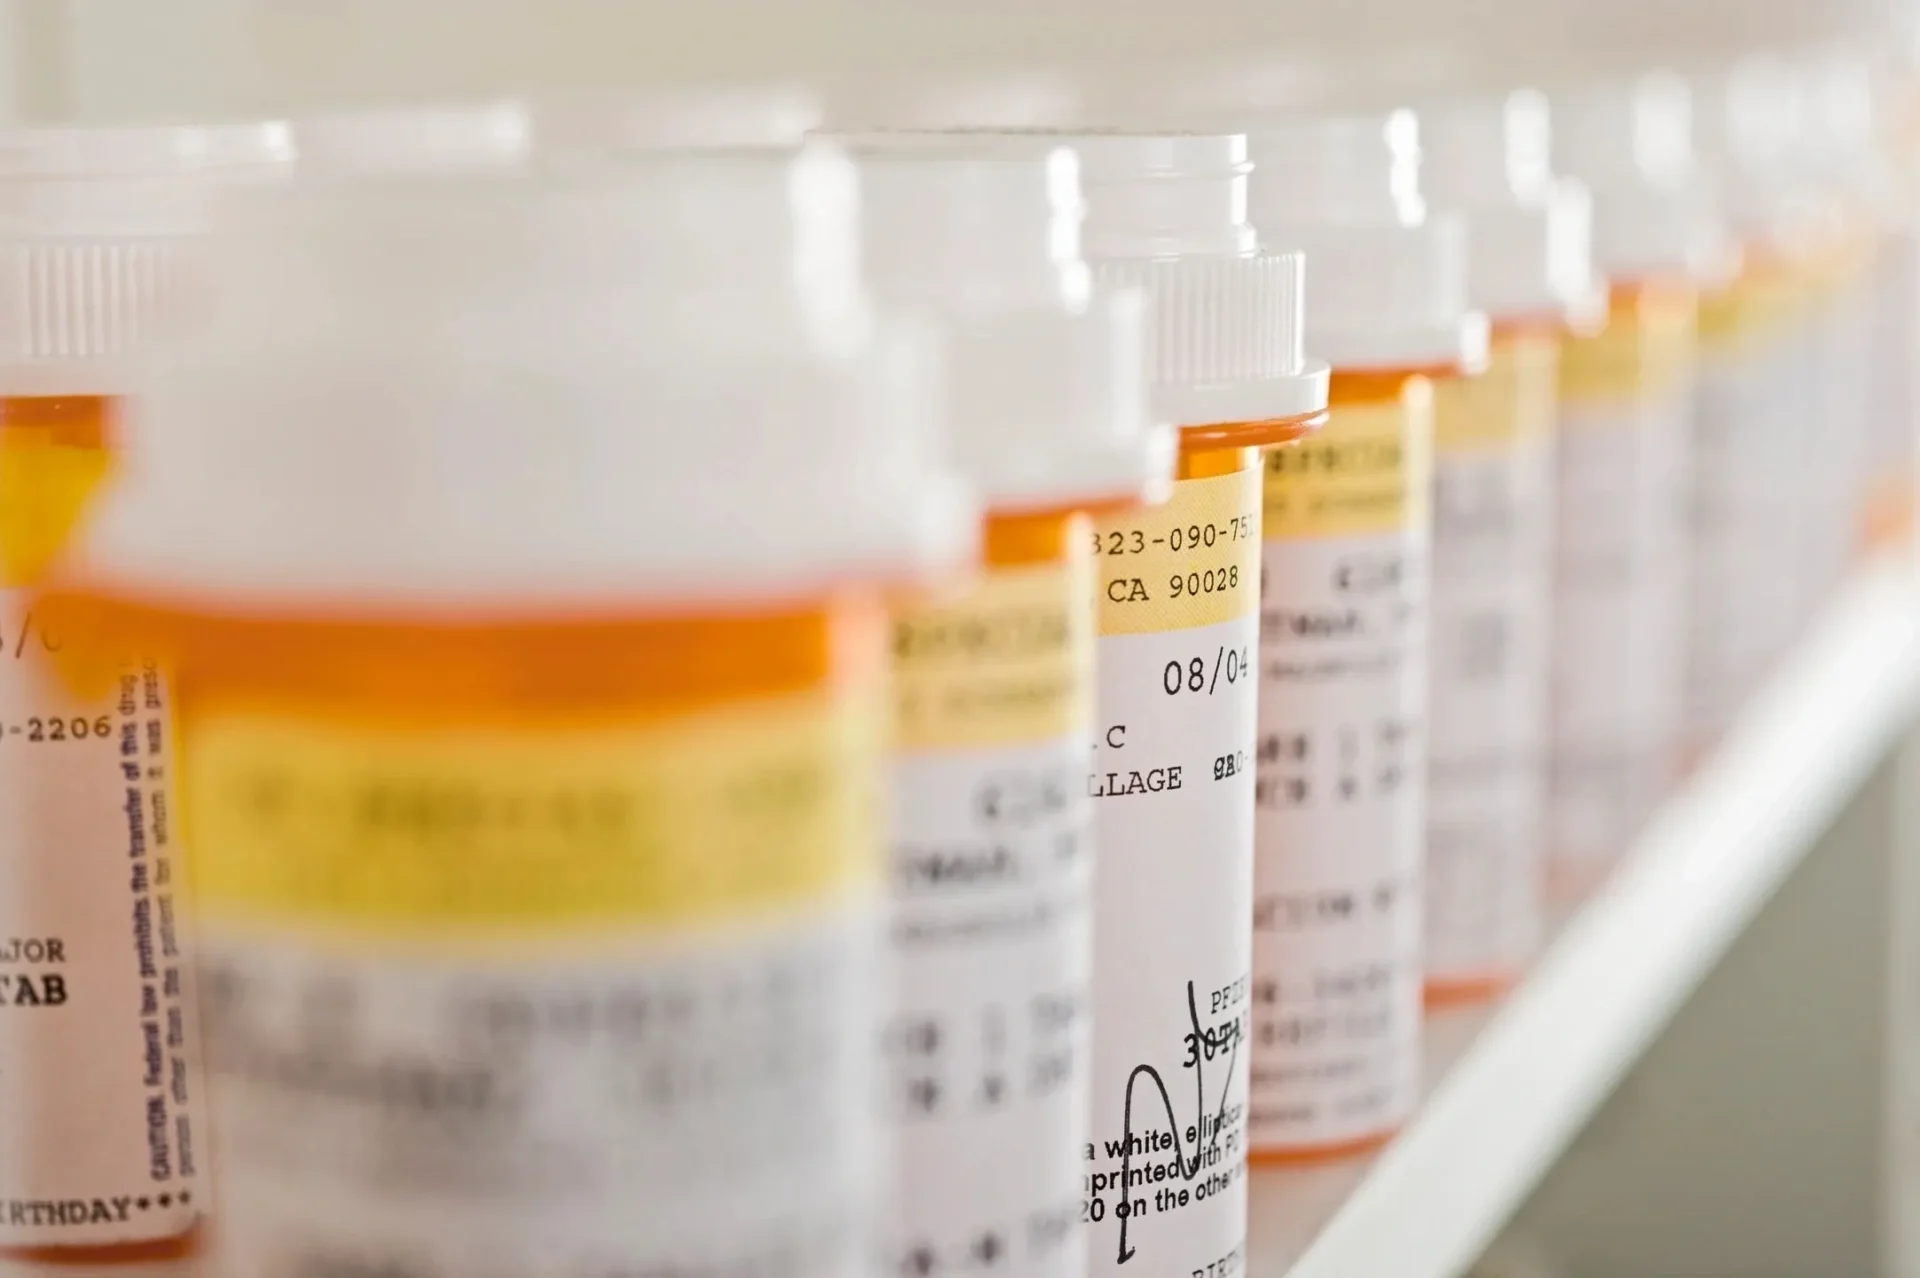 A row of prescription bottles lined up on top of each other.